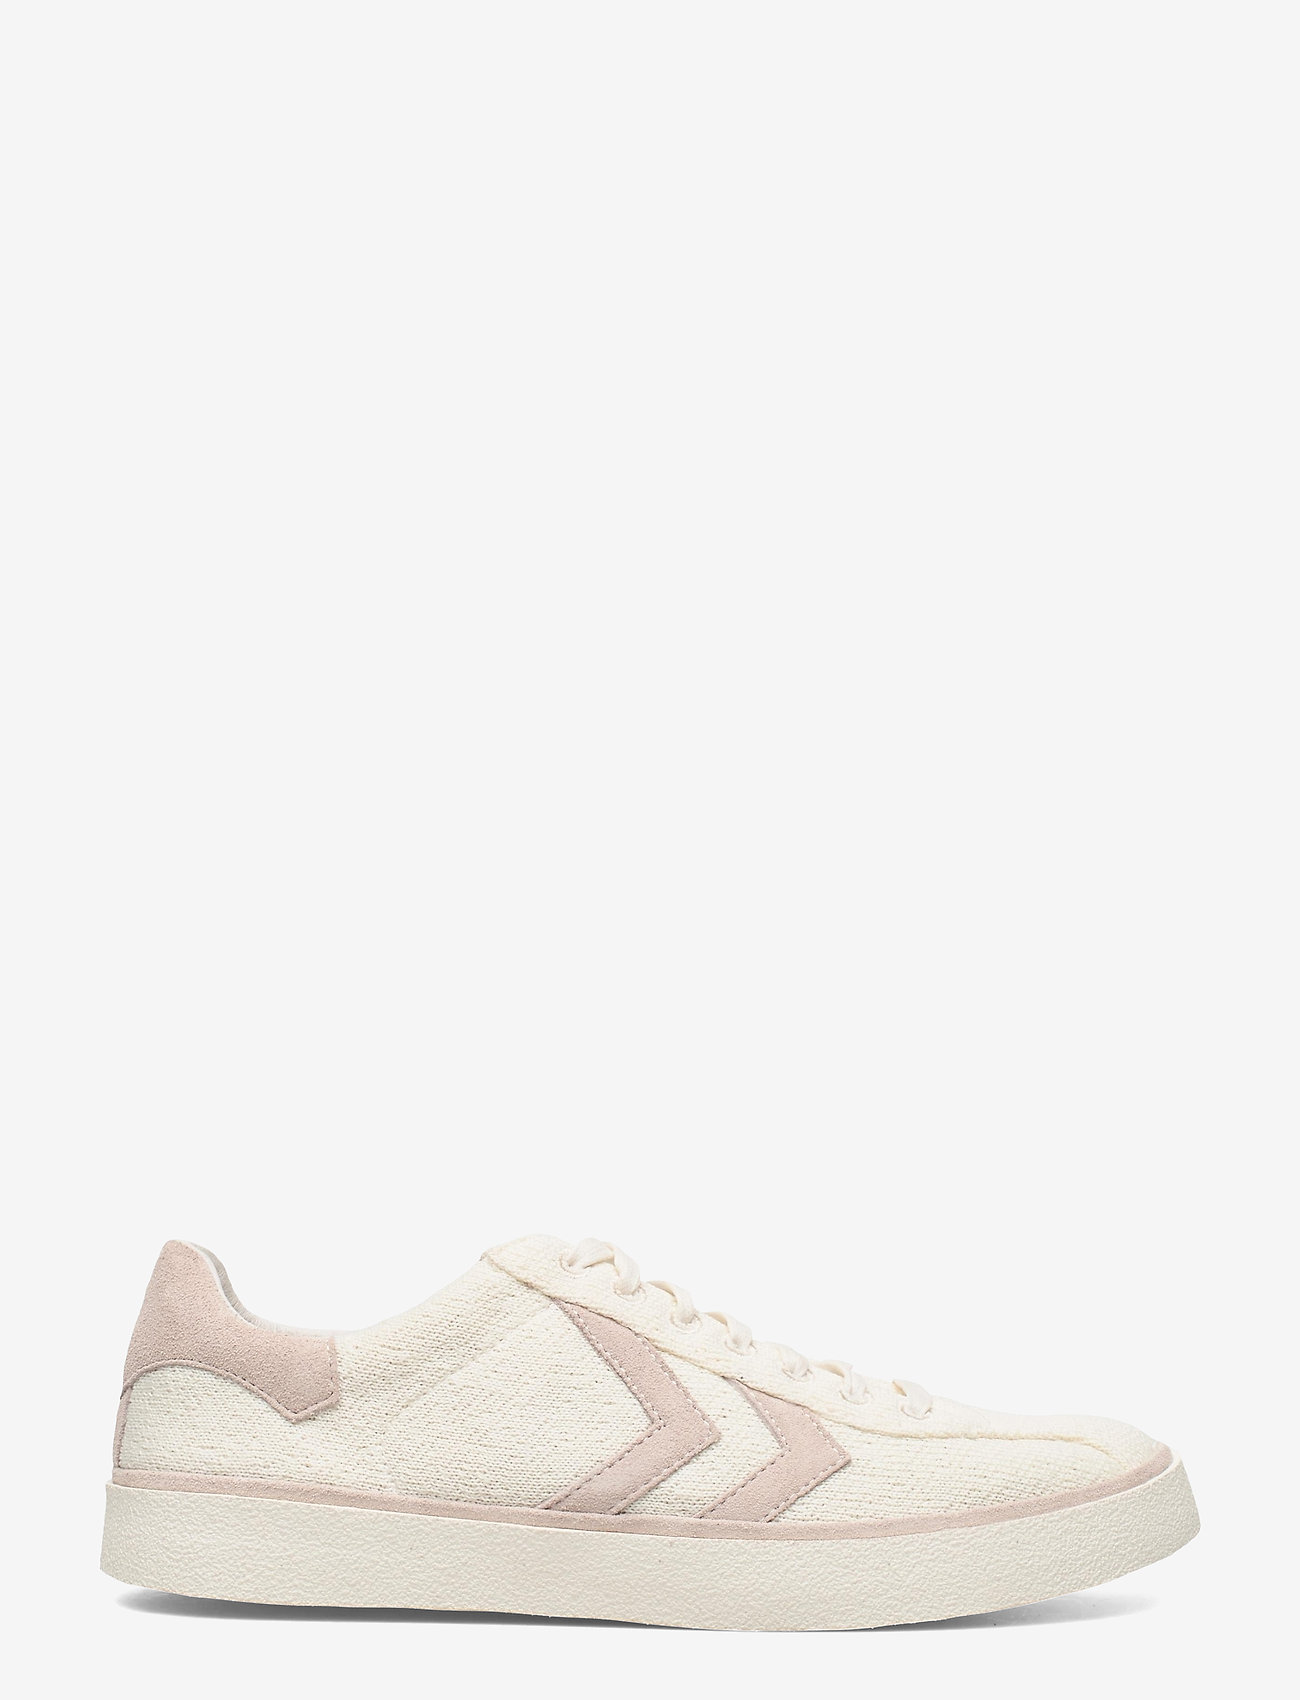 Hummel - DIAMANT 424 ATTACK - low tops - off white - 1